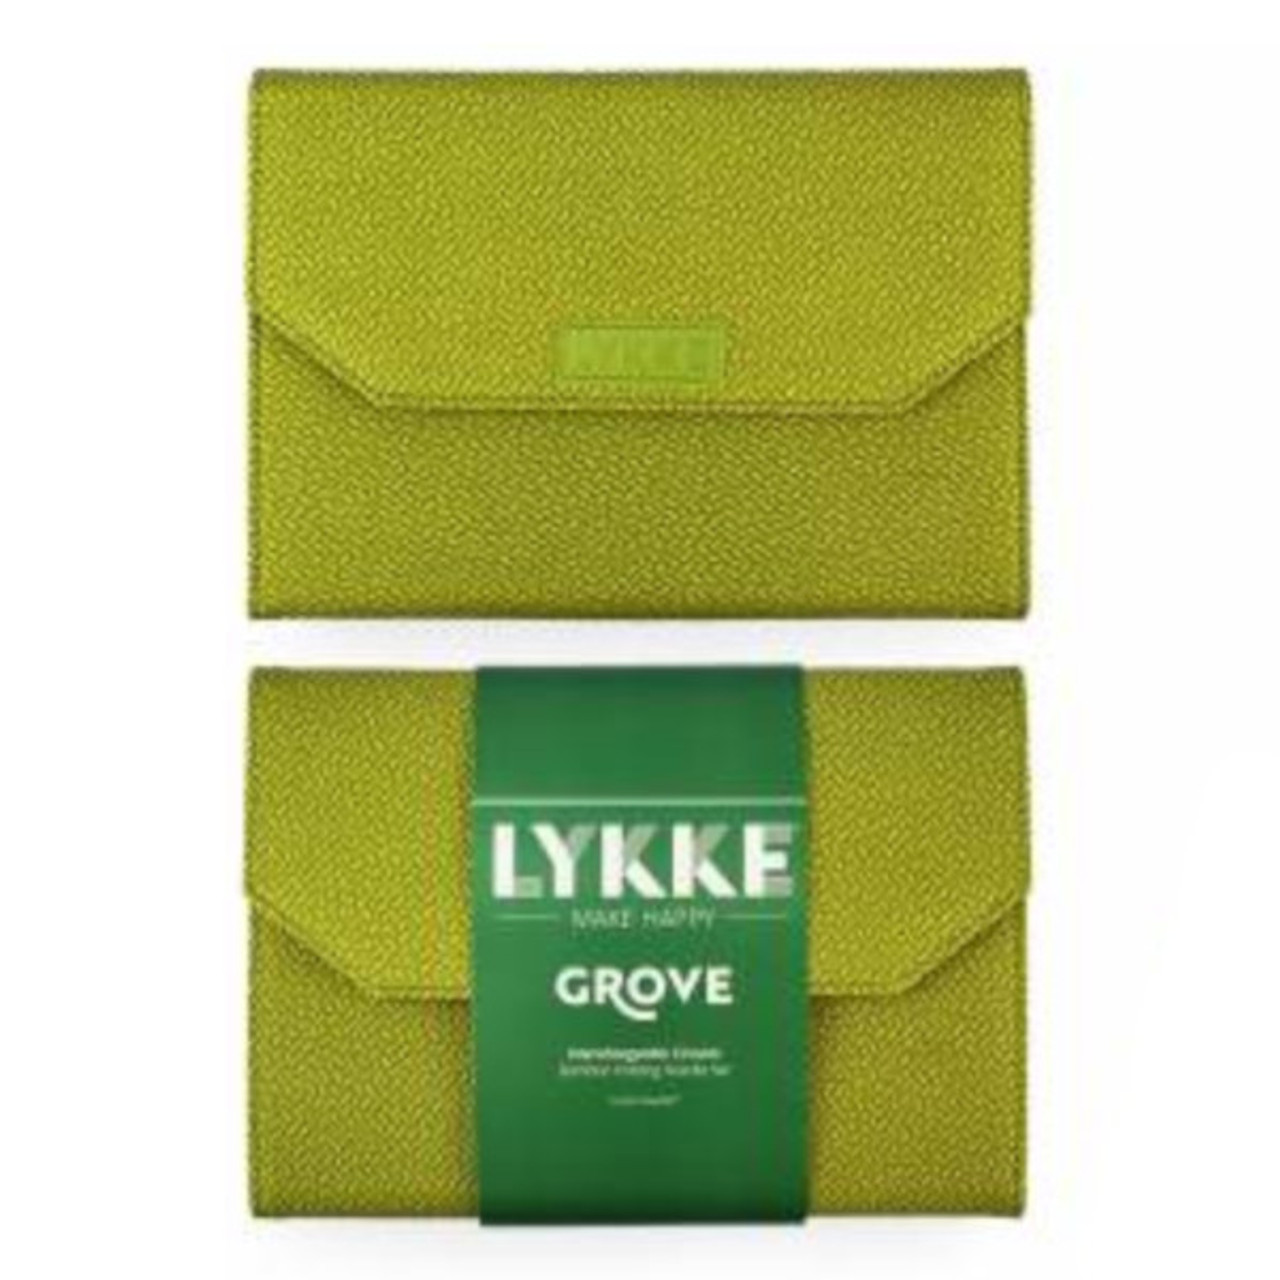 Lykke Grove Interchangeable Circular Needle Set 3.5 Inch - The Websters